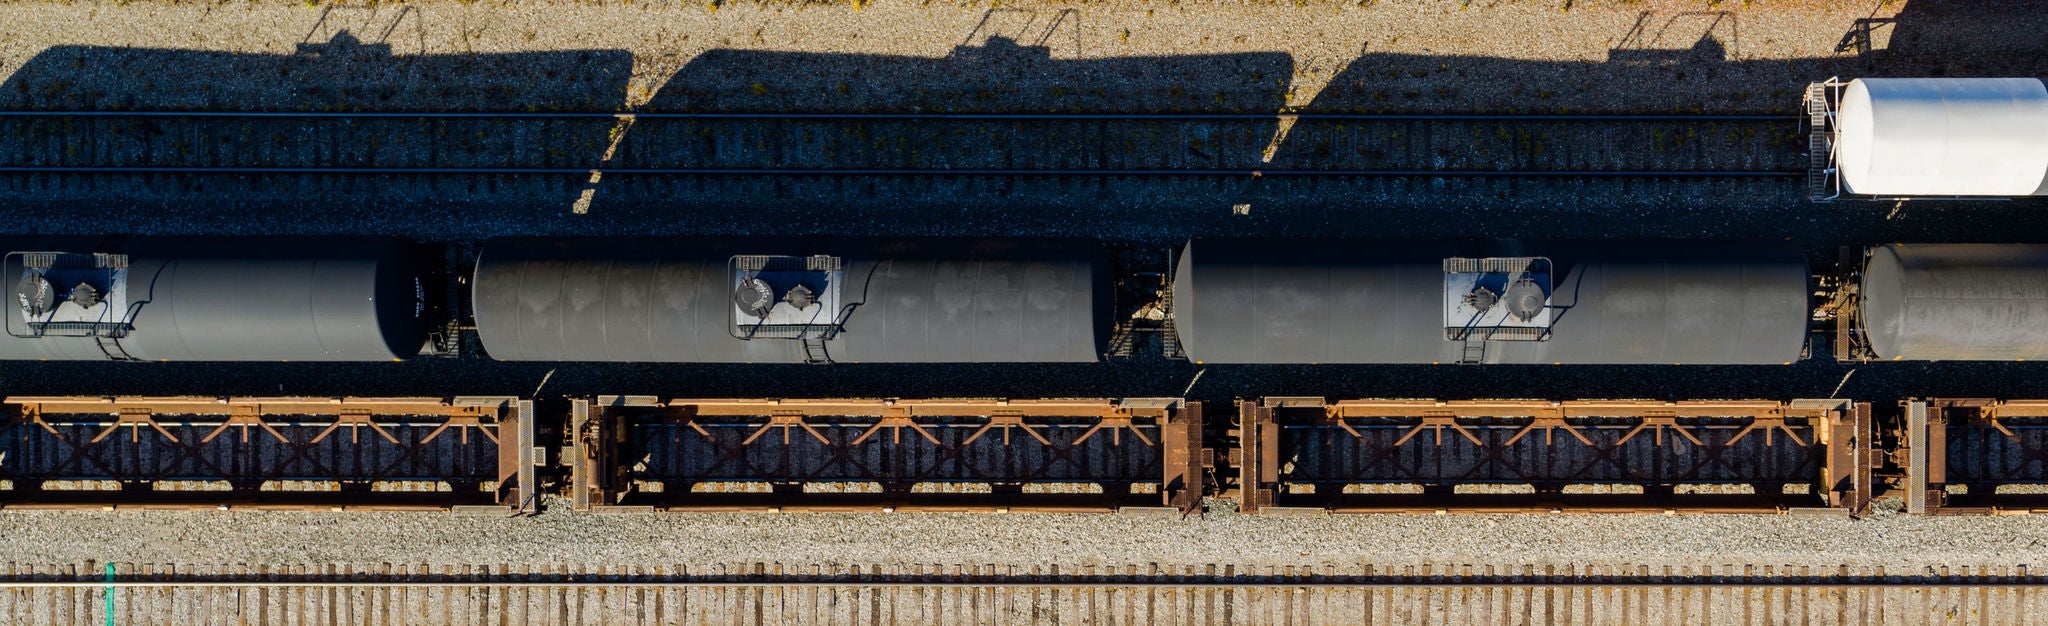 Norfolk Southern Railways chemical transport in black railcars